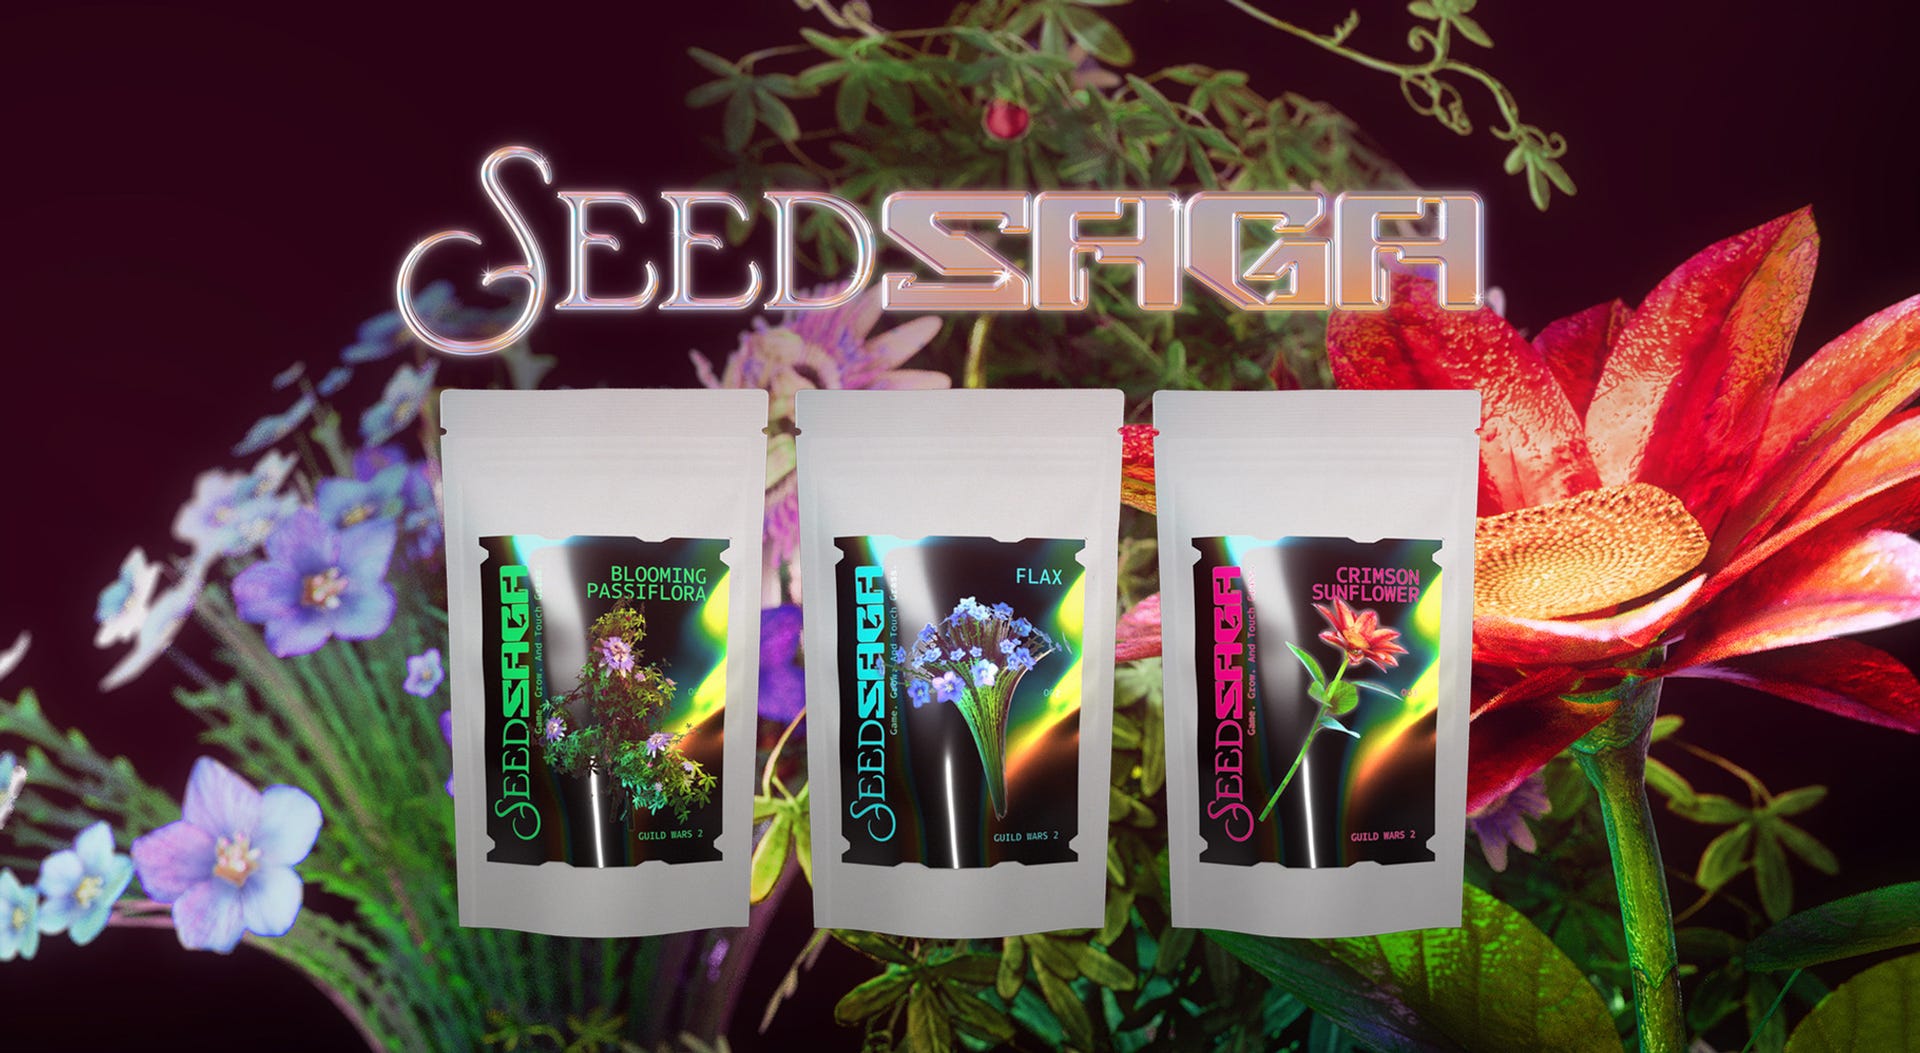 There are gamer-branded flower seeds now - thank you, Guild Wars 2